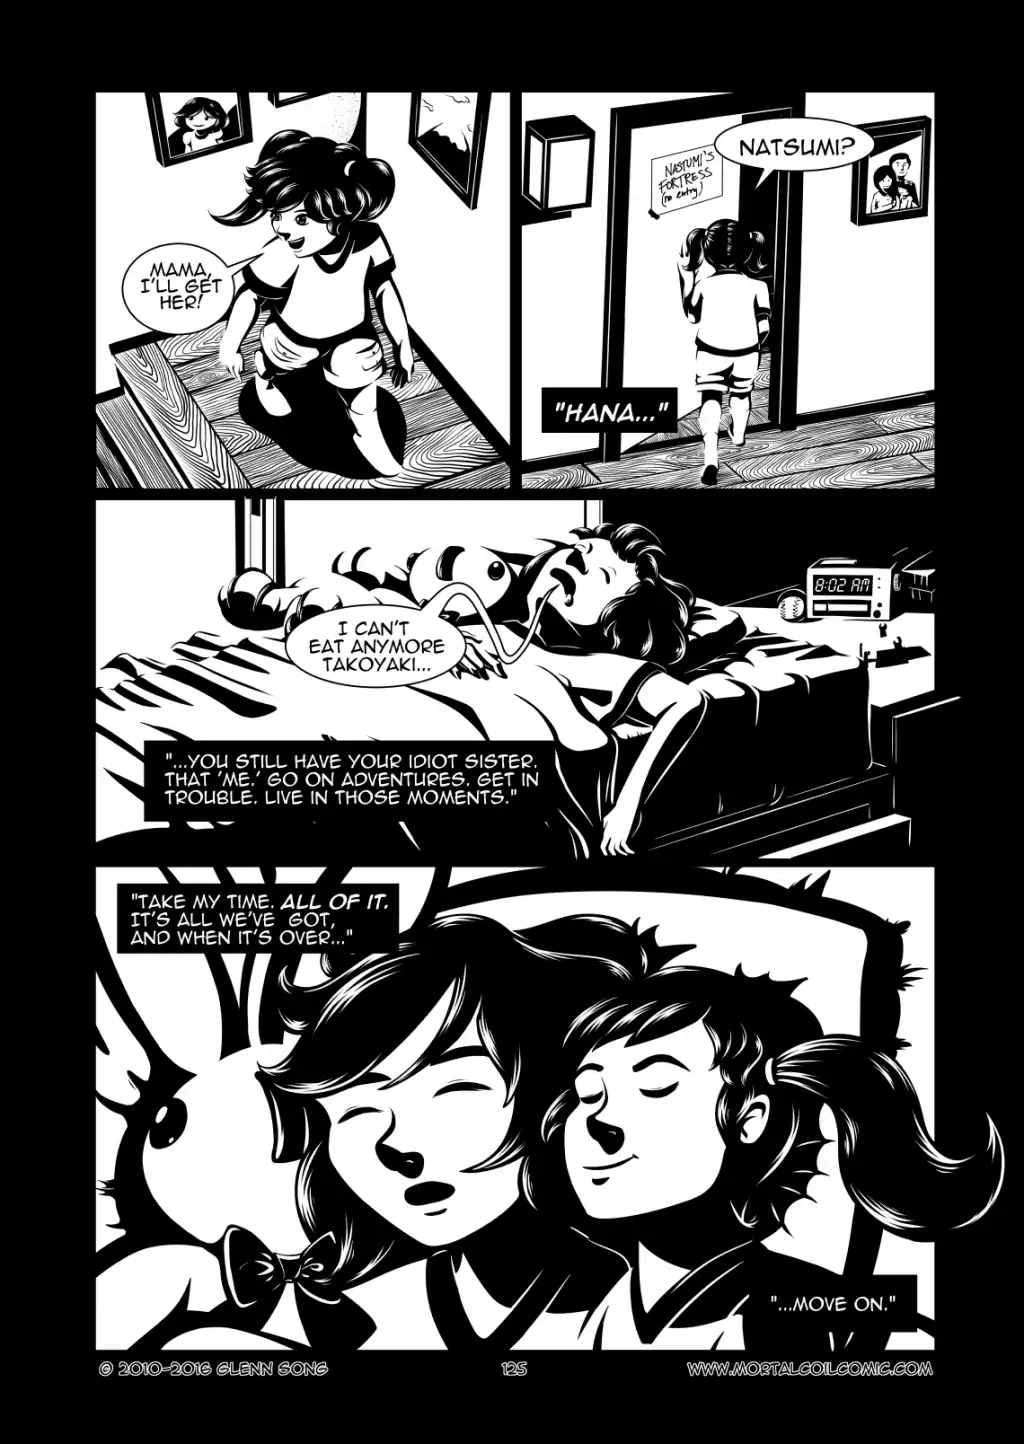 Home, Page 3 (Finale)